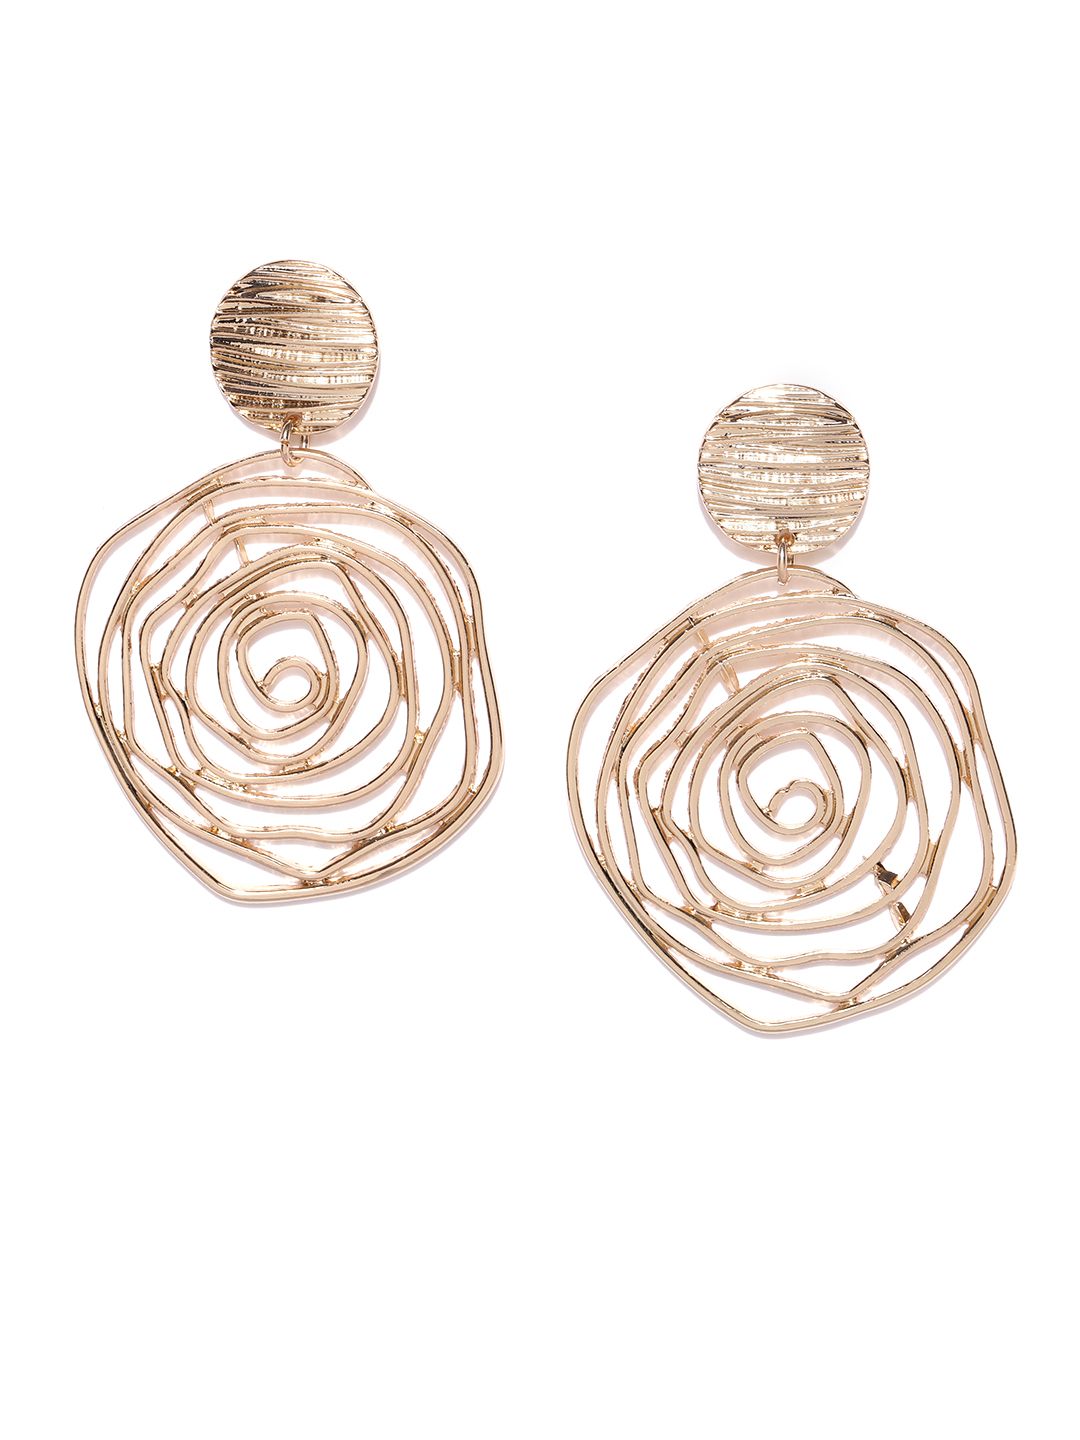 DressBerry Gold-Toned Floral-Shaped Drop Earrings Price in India